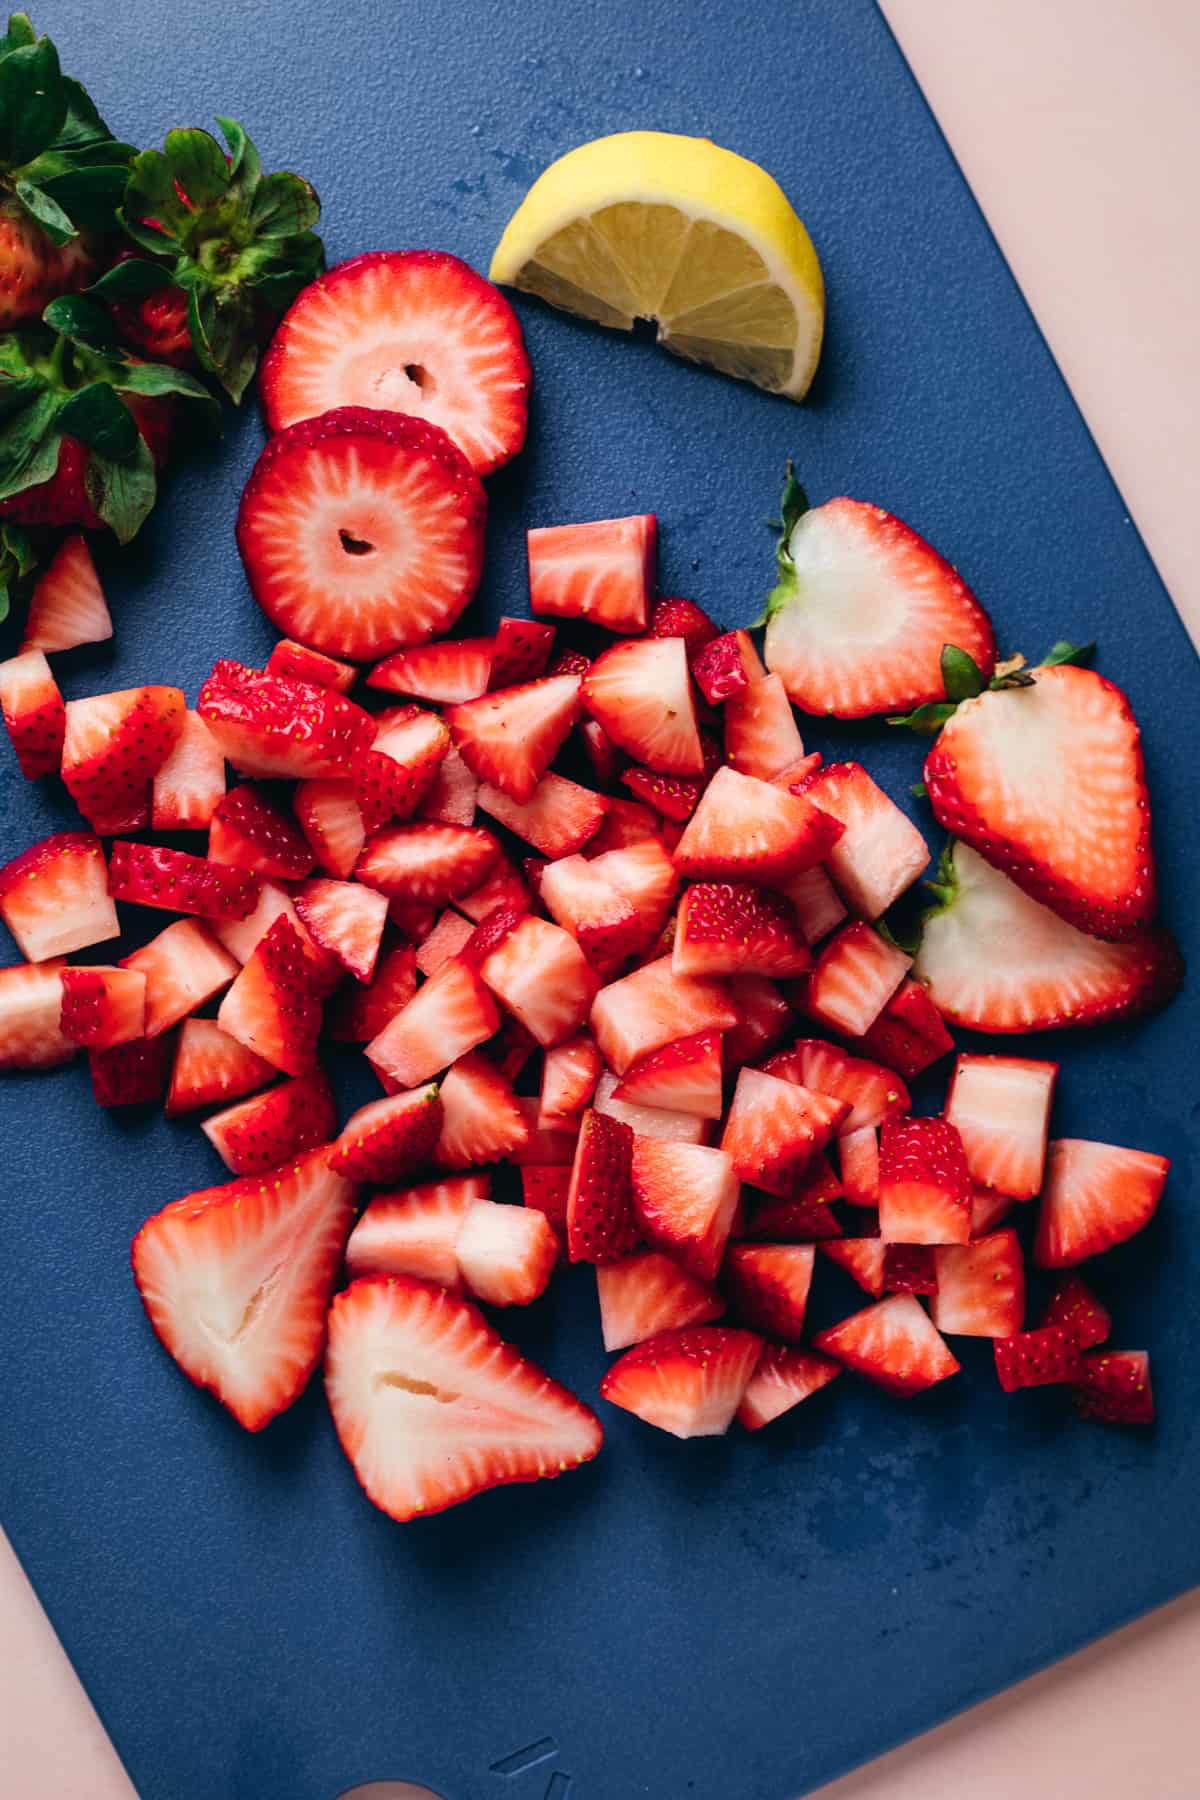 Strawberries being sliced into bite size pieces on a blue cutting board.